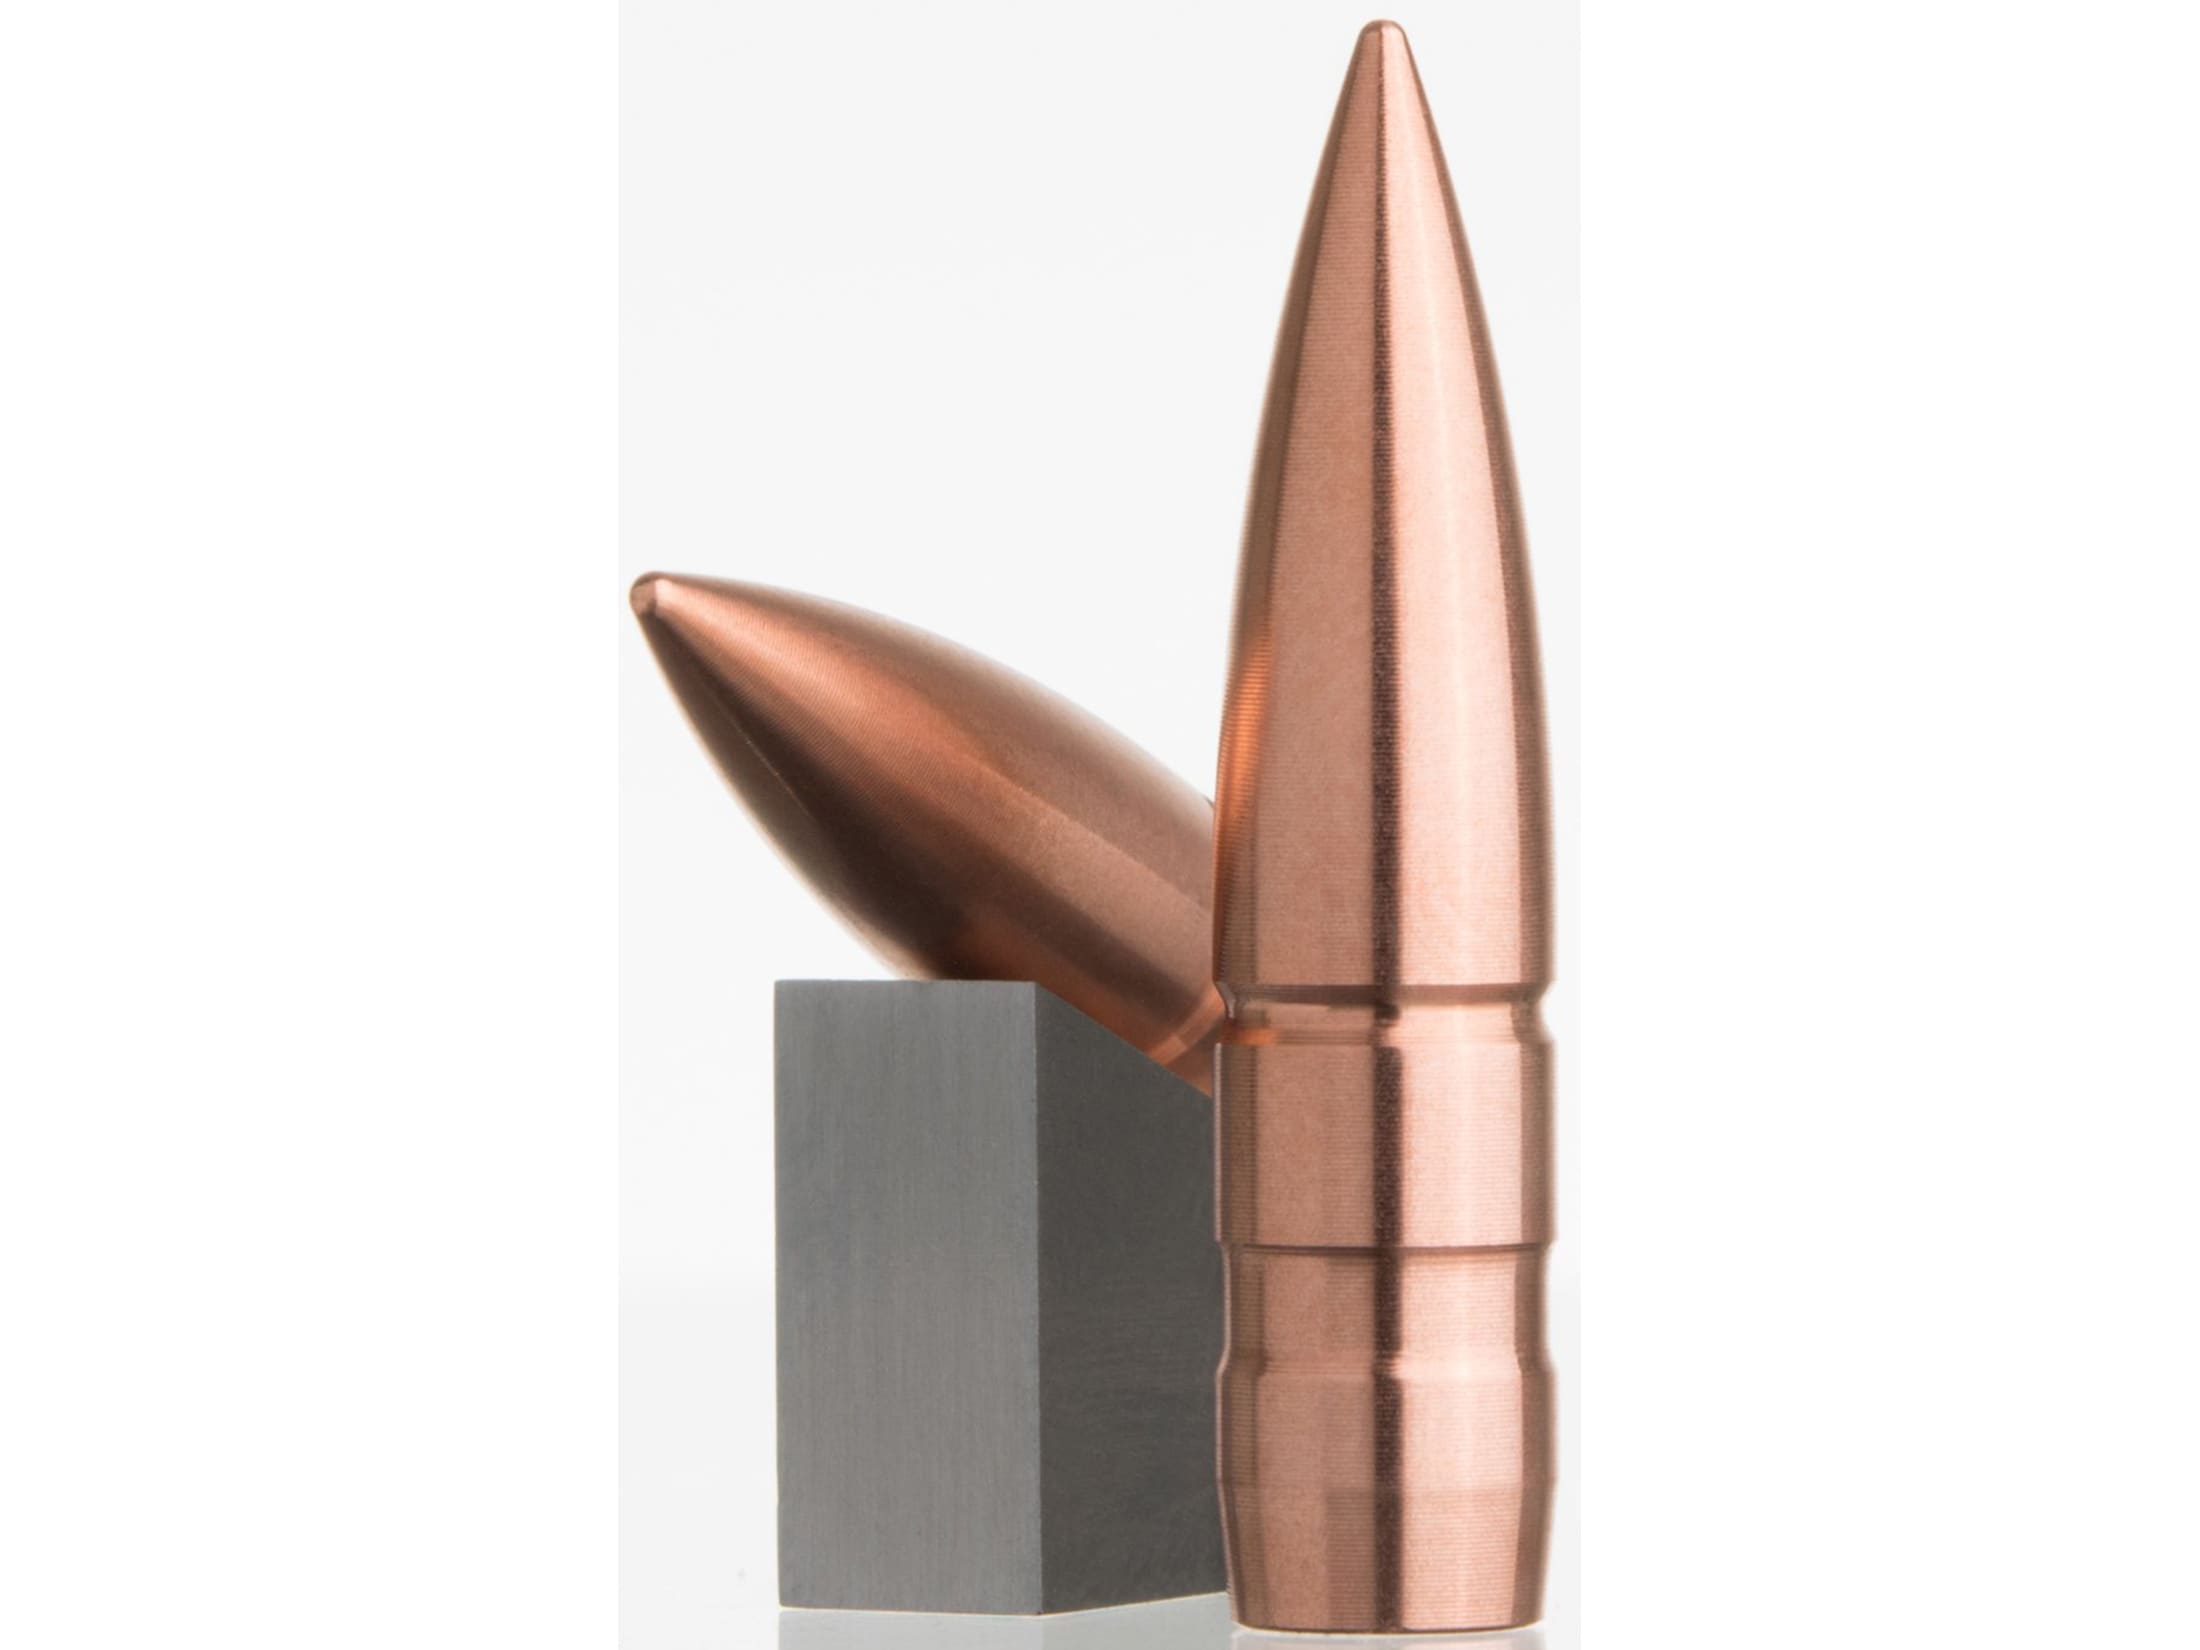 Lehigh Defense Match Solid Bullets 264 Caliber, 6.5mm (264 Diameter) 110 Grain Solid Copper Boat Tail Lead-Free